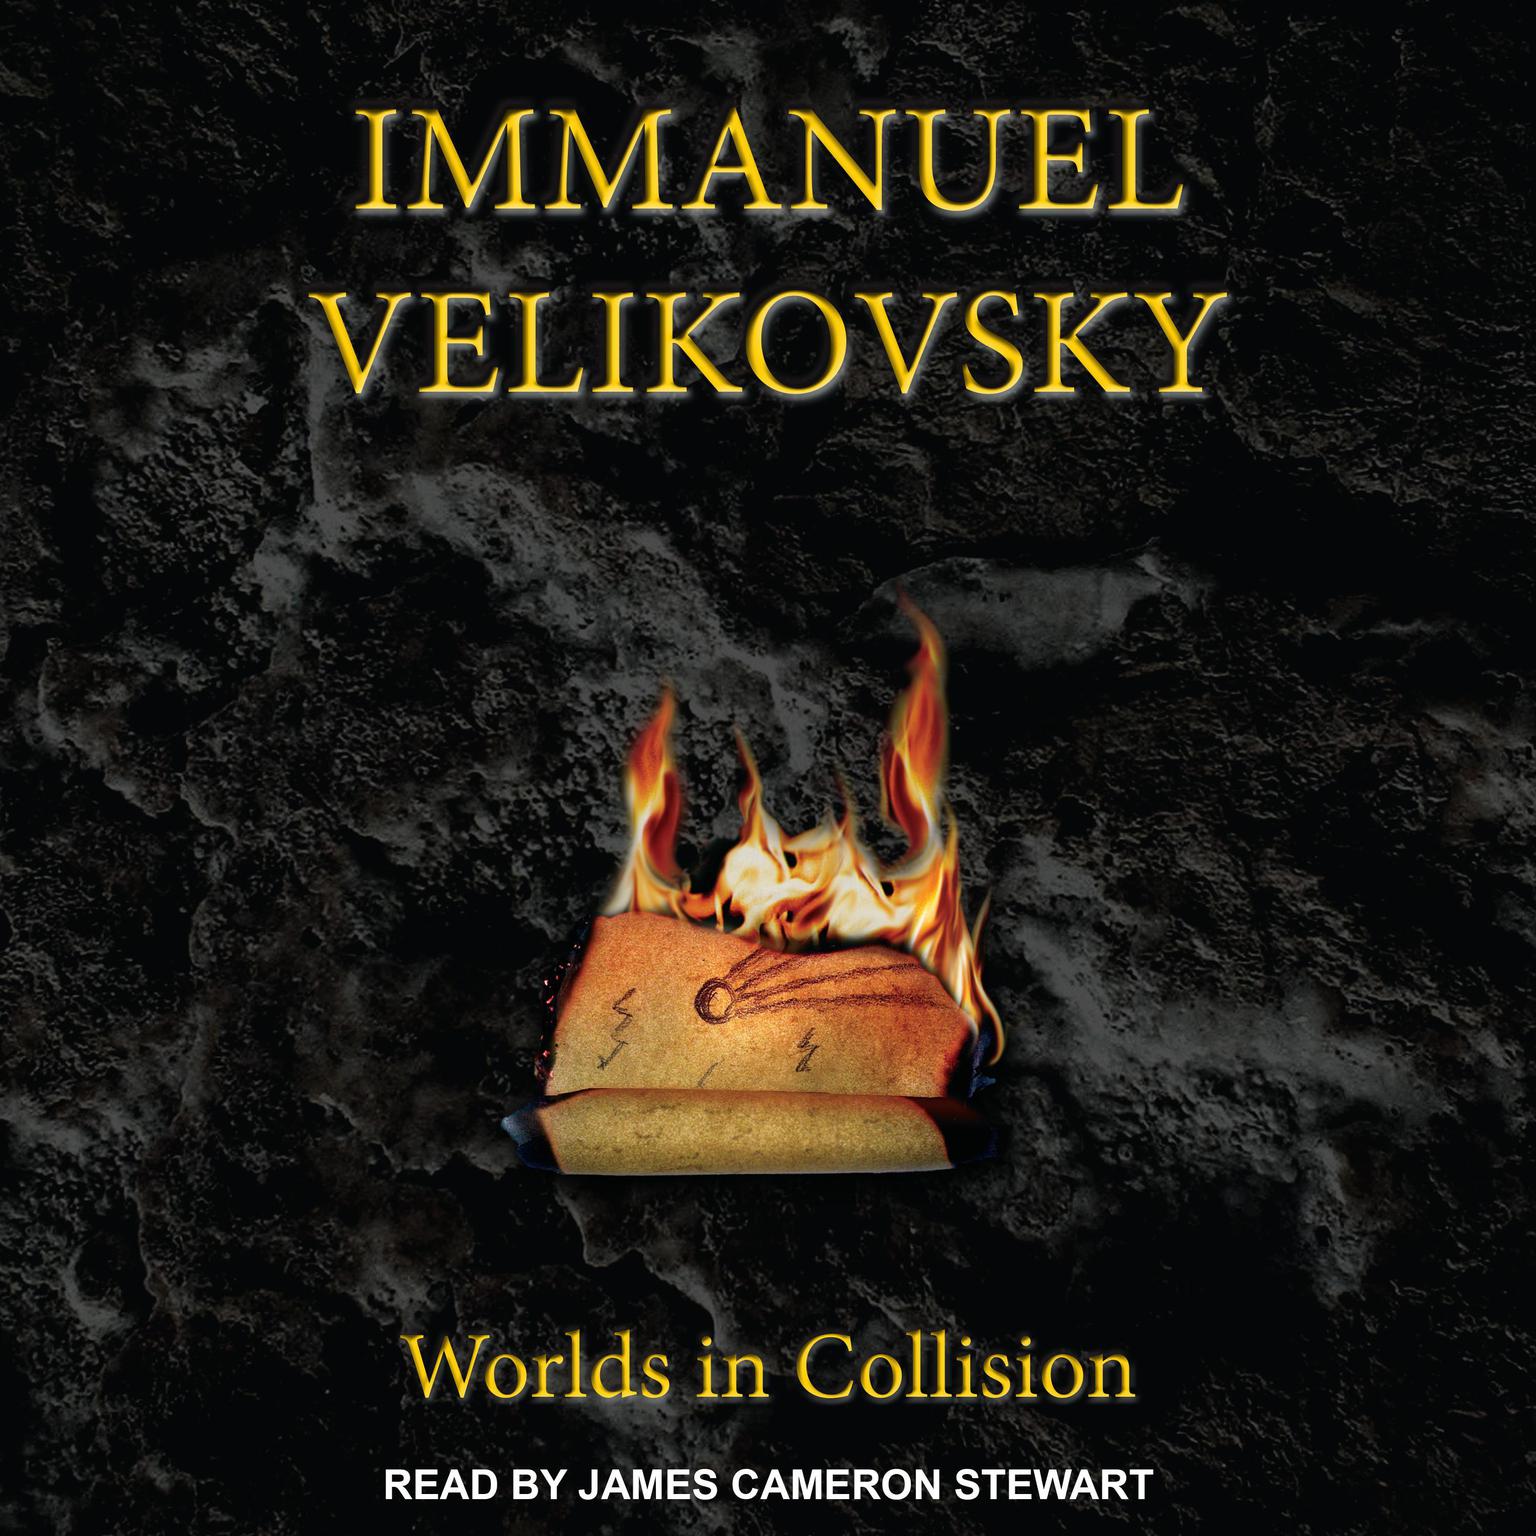 Worlds in Collision Audiobook, by Immanuel Velikovsky